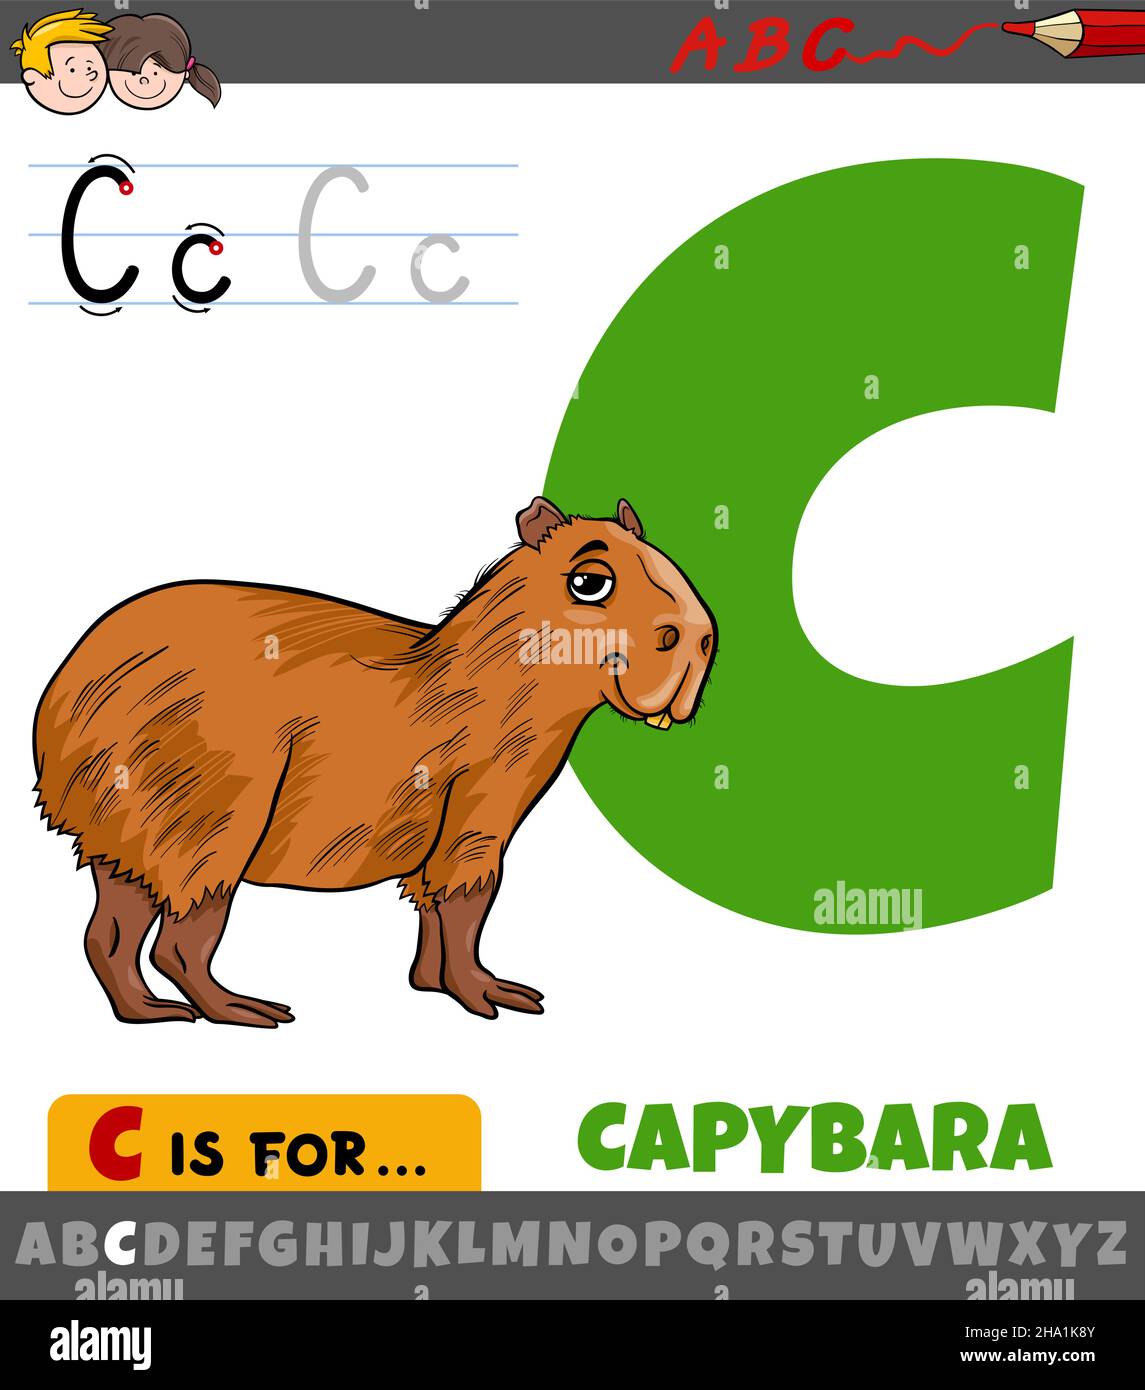 Educational cartoon illustration of letter C from alphabet with capybara animal character Stock Vector